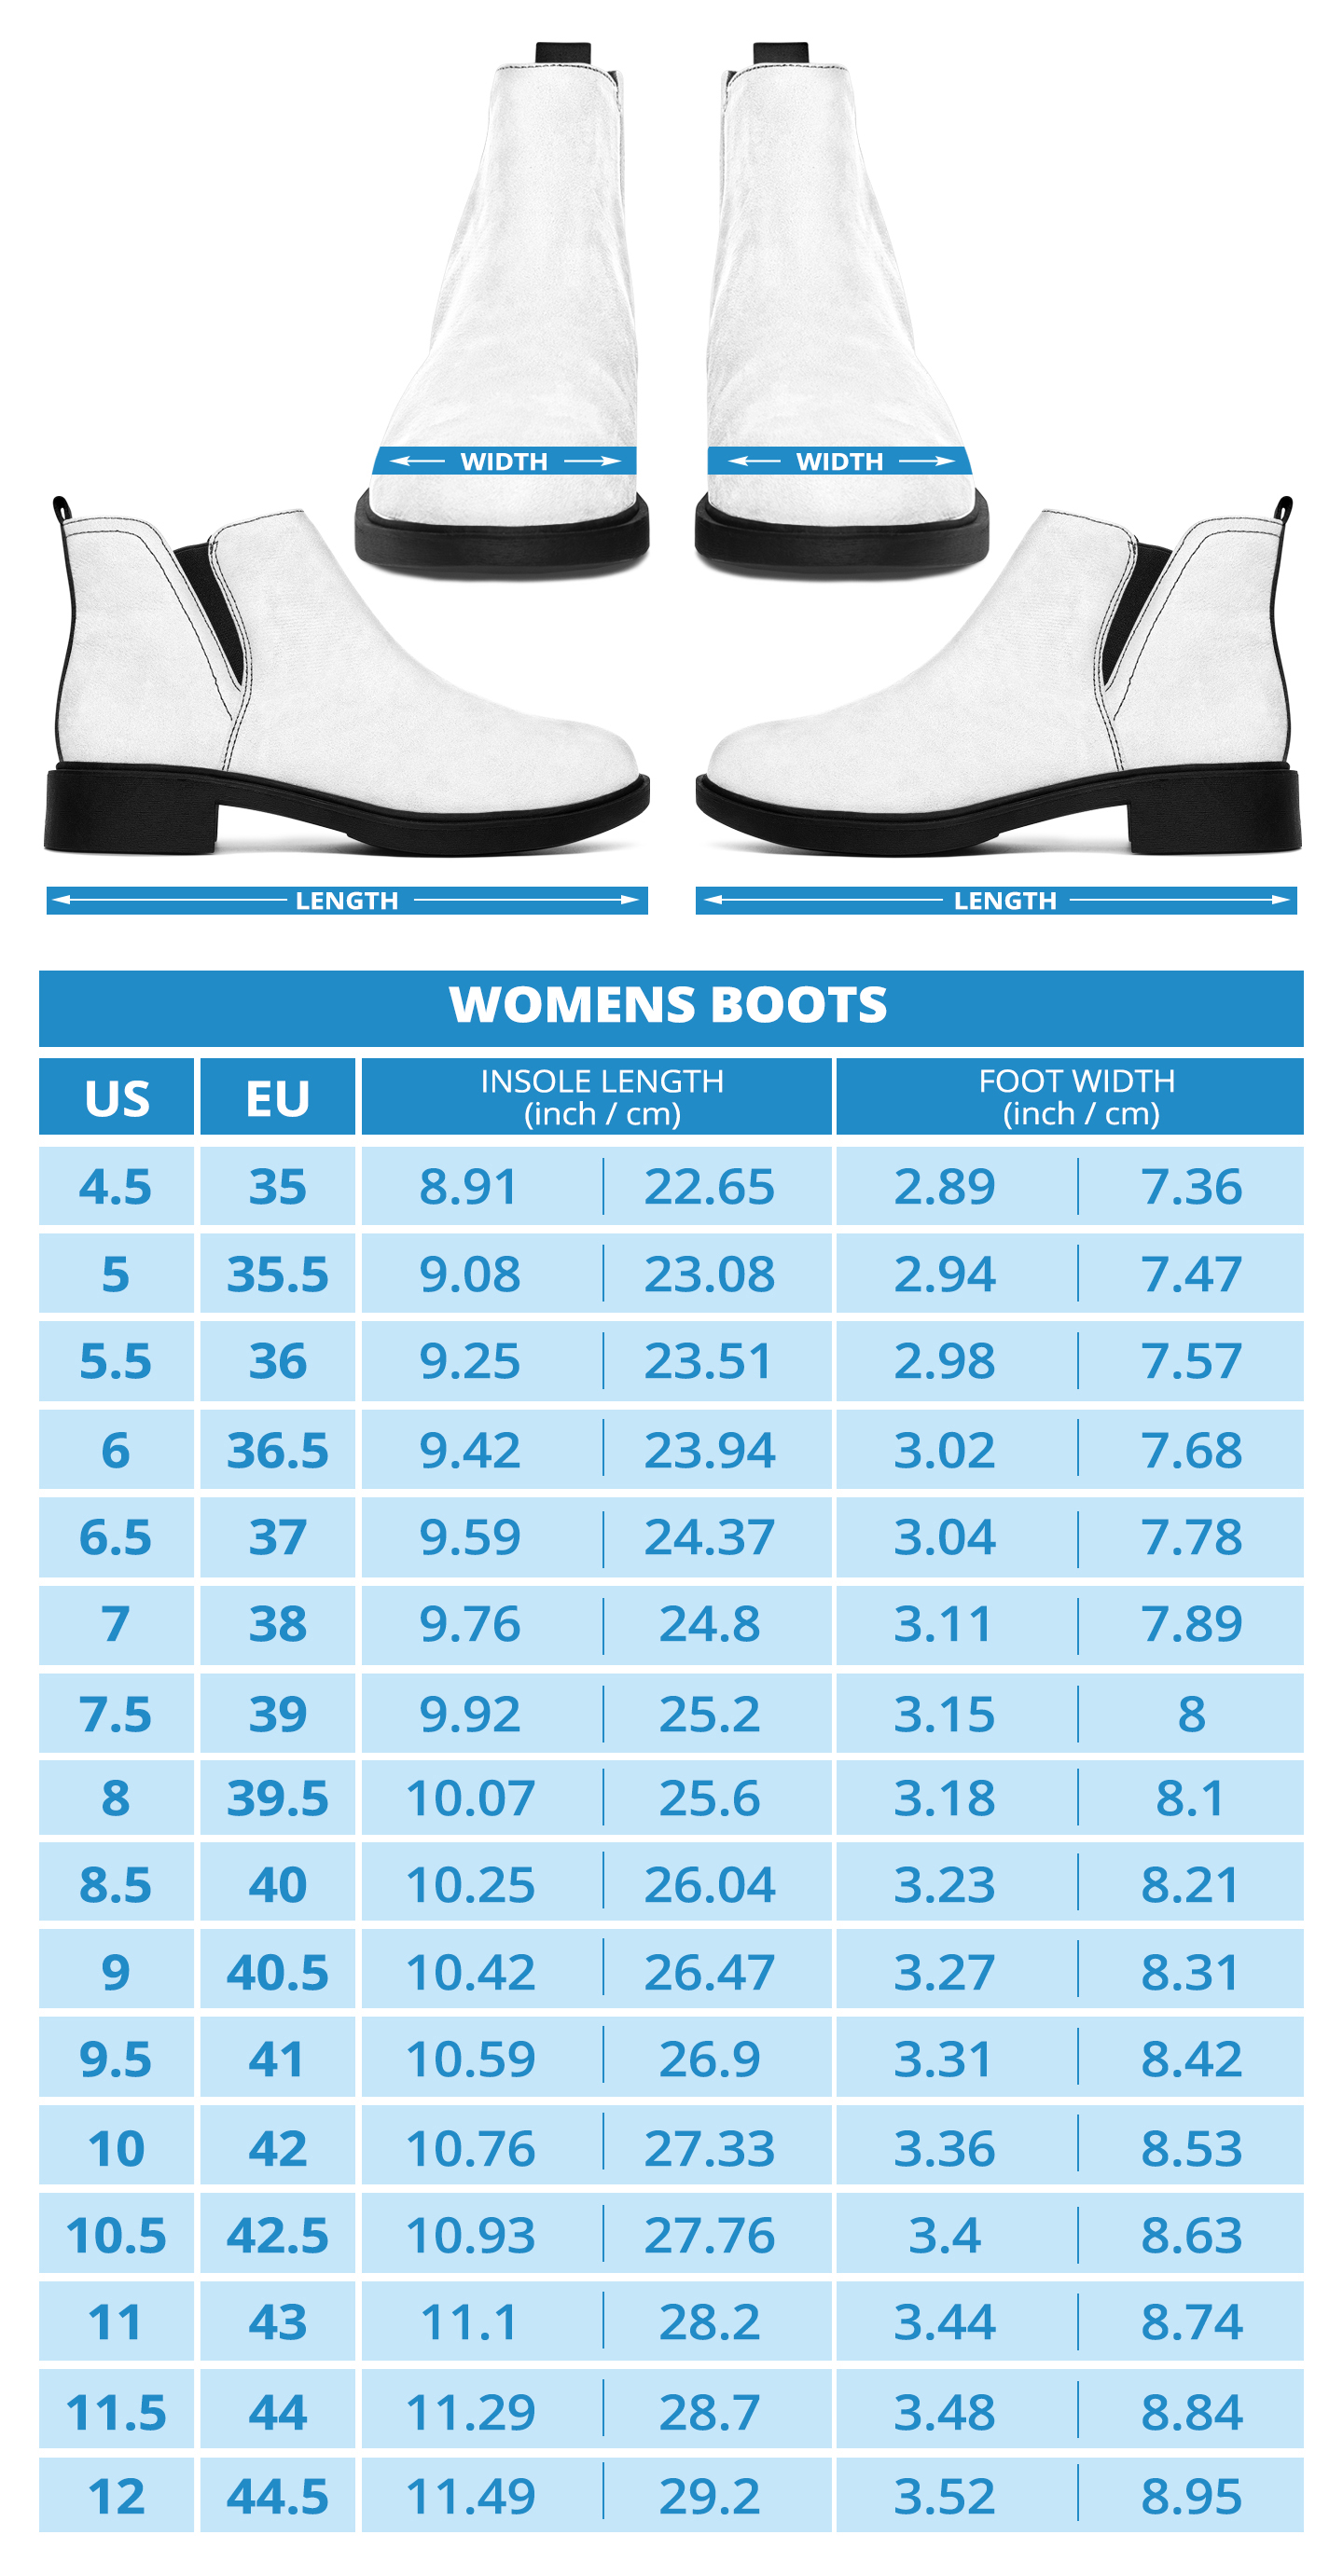 Fashion boots 2019 Sizing Chart - The Cow Print